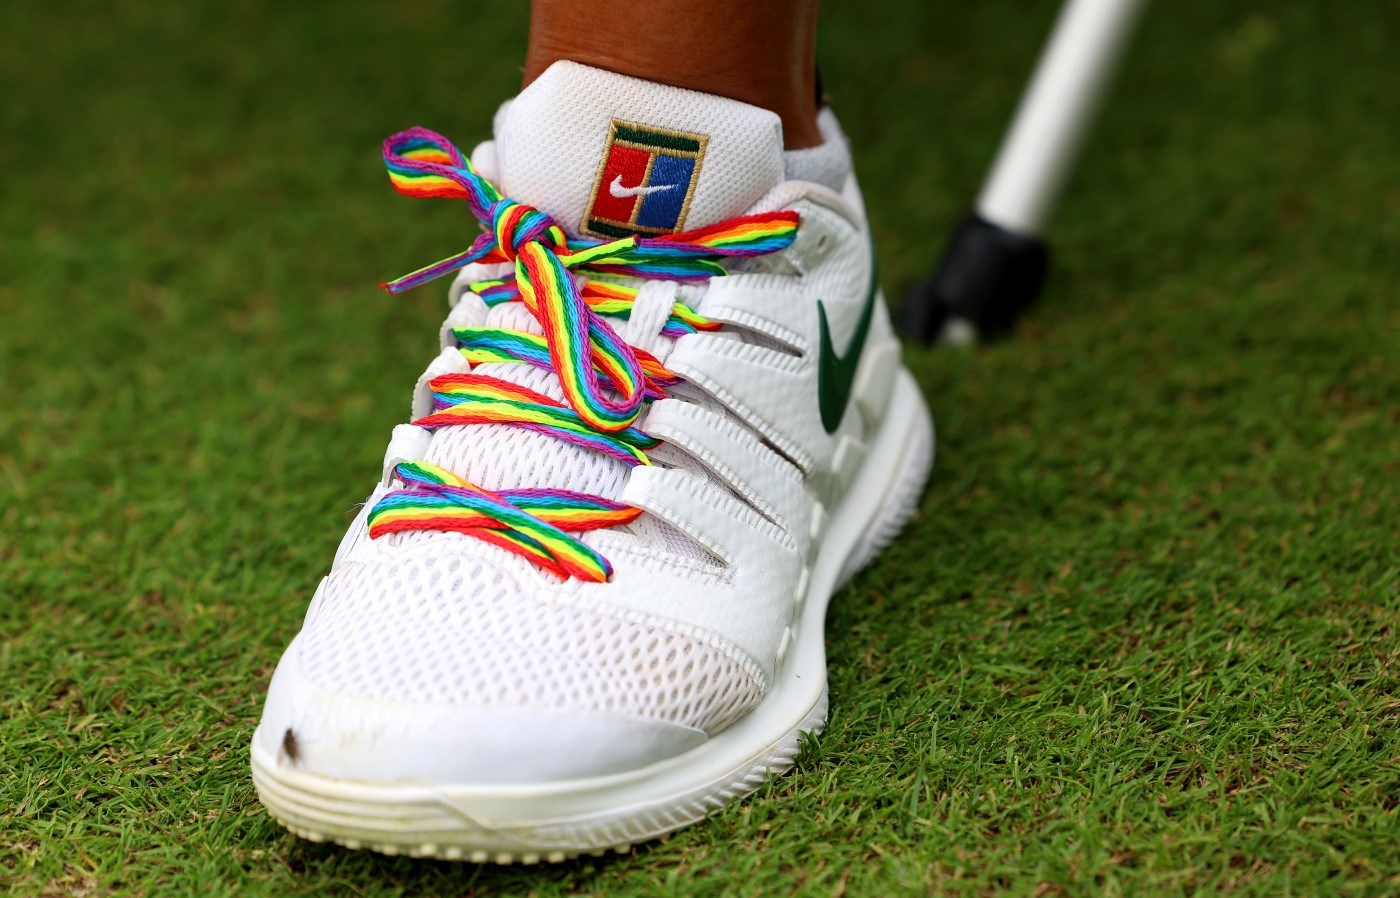 A white trainer with rainbow coloured laces